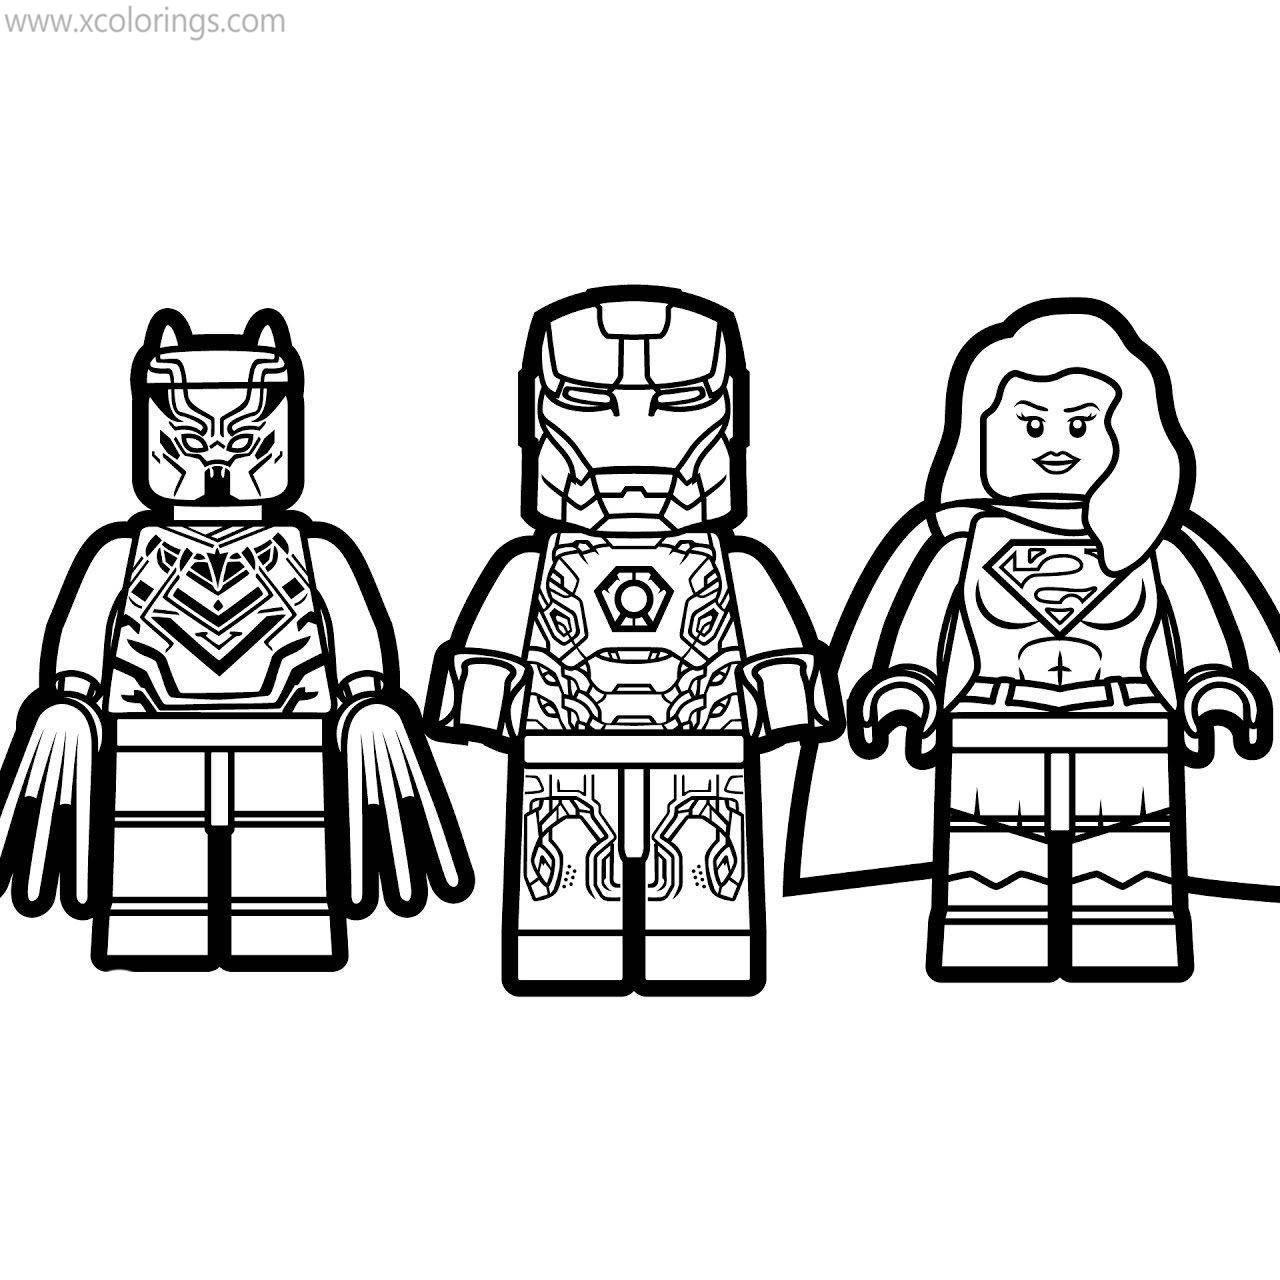 Free Lego Black Panther Coloring Pages with Lego Iron Man and Lego Supergirl printable